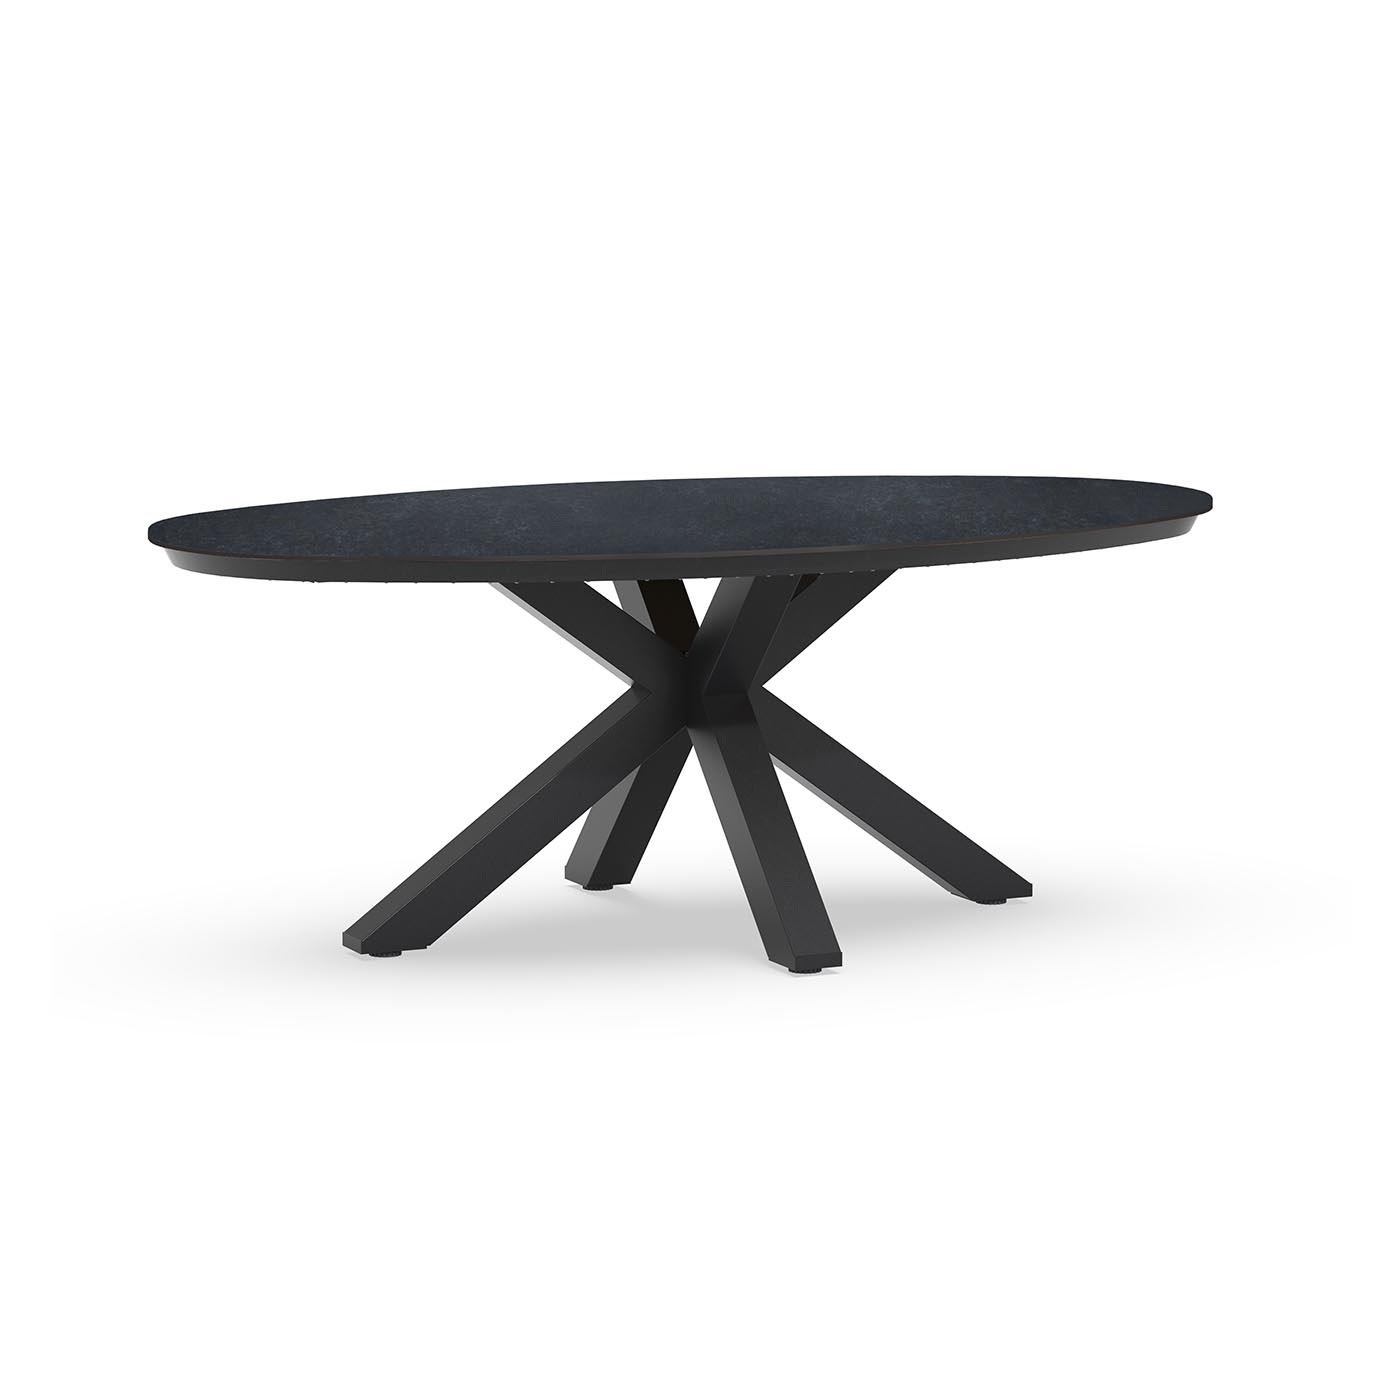 Oblong Dining Table Trespa Graphite 200 x 110 cm Charcoal